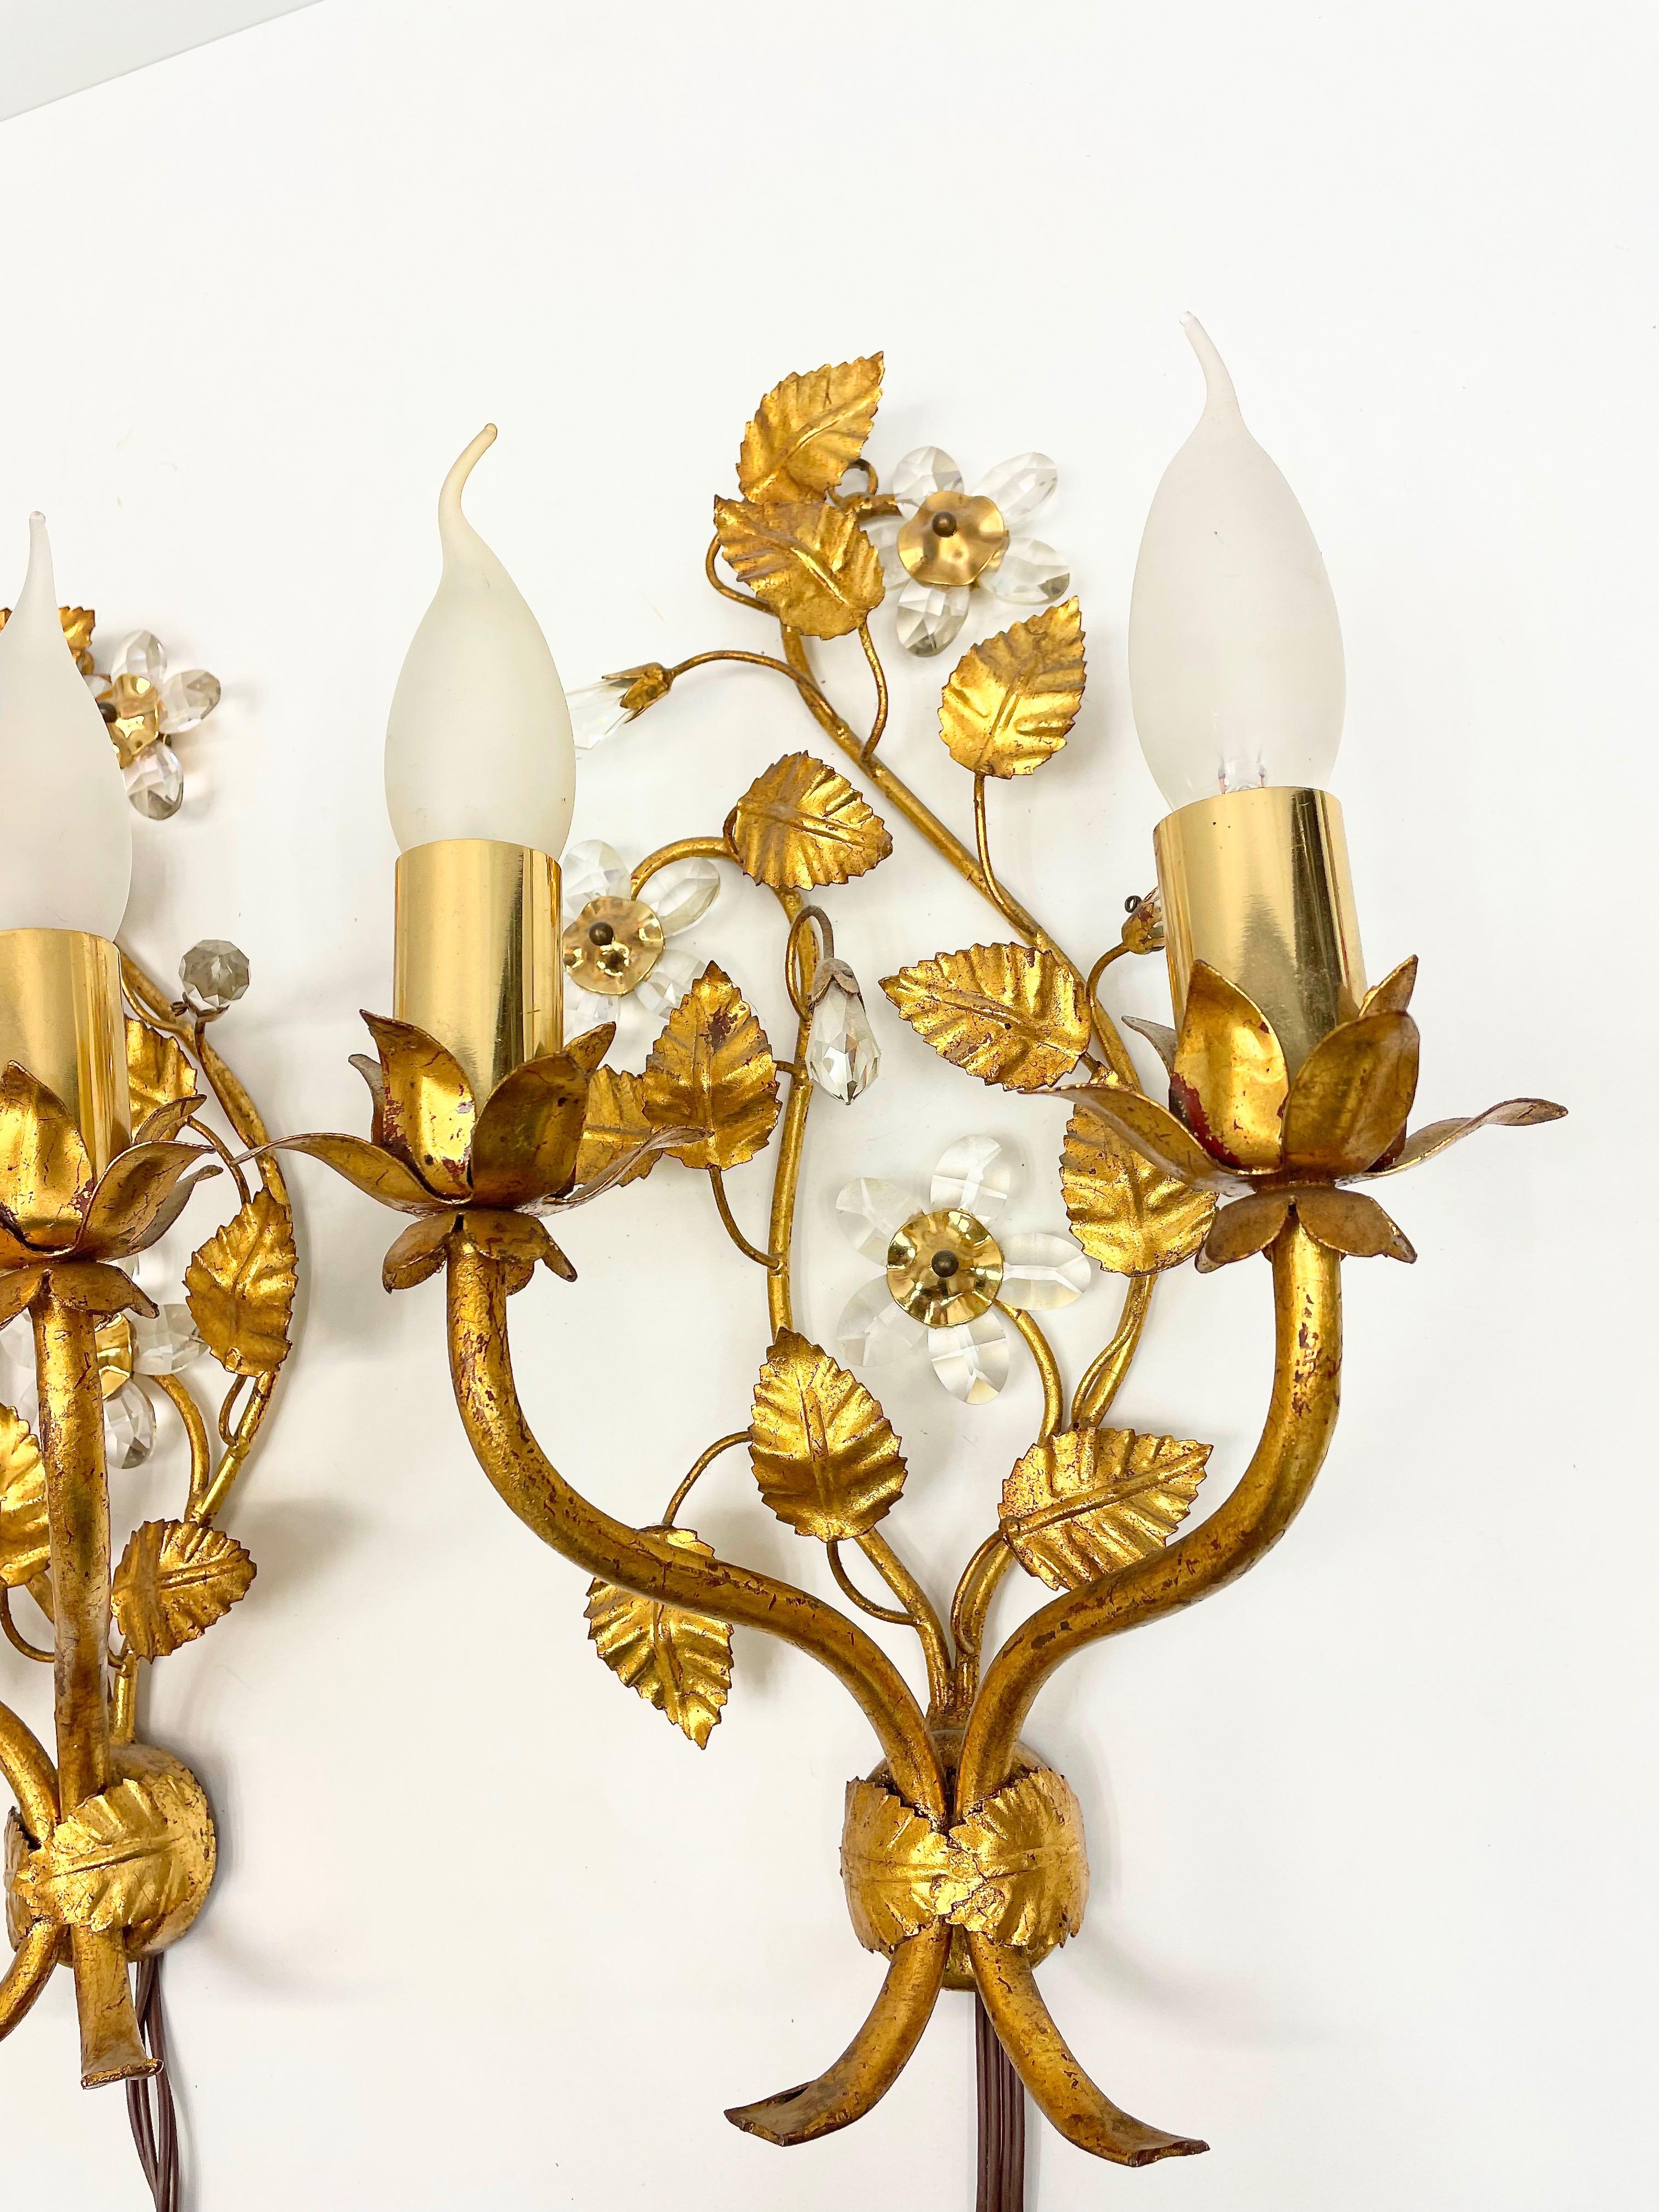 A pair iron gilded floral sconce by Banci Firenze with crystal flowers and leaves. Each fixture requires two European E14 candelabra bulbs, each bulb up to 40 watts. The wall light has a beautiful patina and gives each room an eclectic statement.